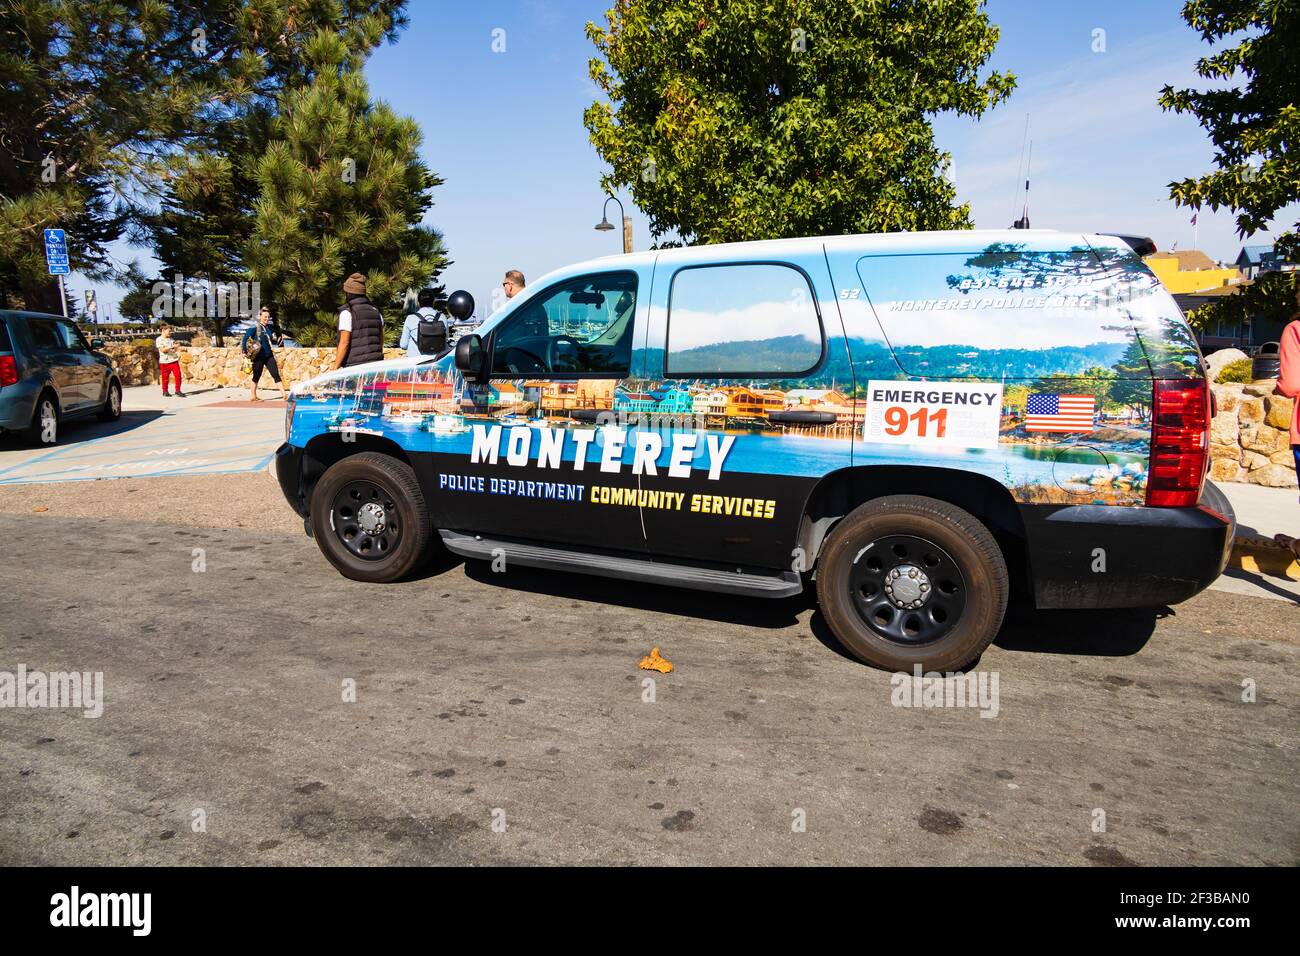 Monterey Police Department Community Services Chevrolet patrol vehicle. Old Monterey, California, United States of America. Stock Photo